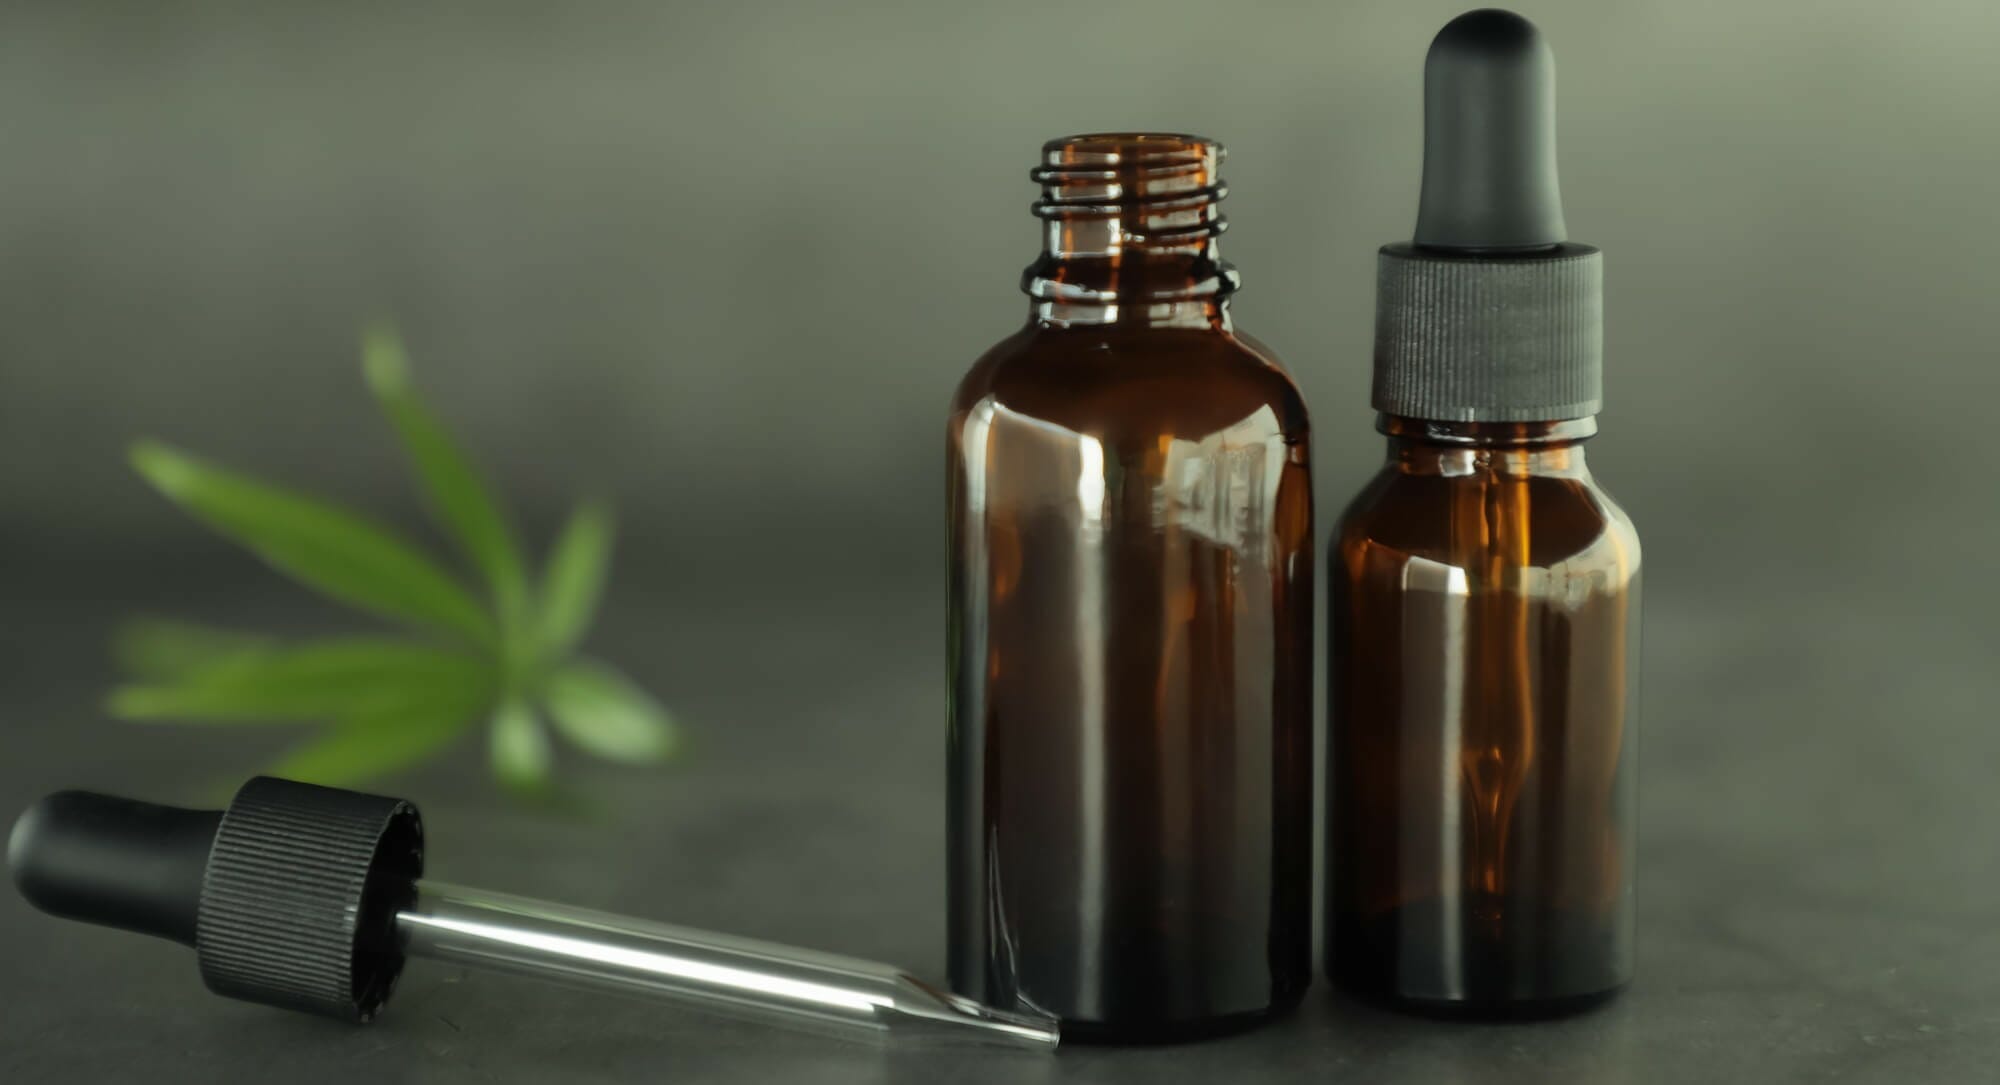 An opened brown tincture bottle with its dropper laying beside it sitting beside a closed brown ticture bottle with a blurred cannabis leaf in the background